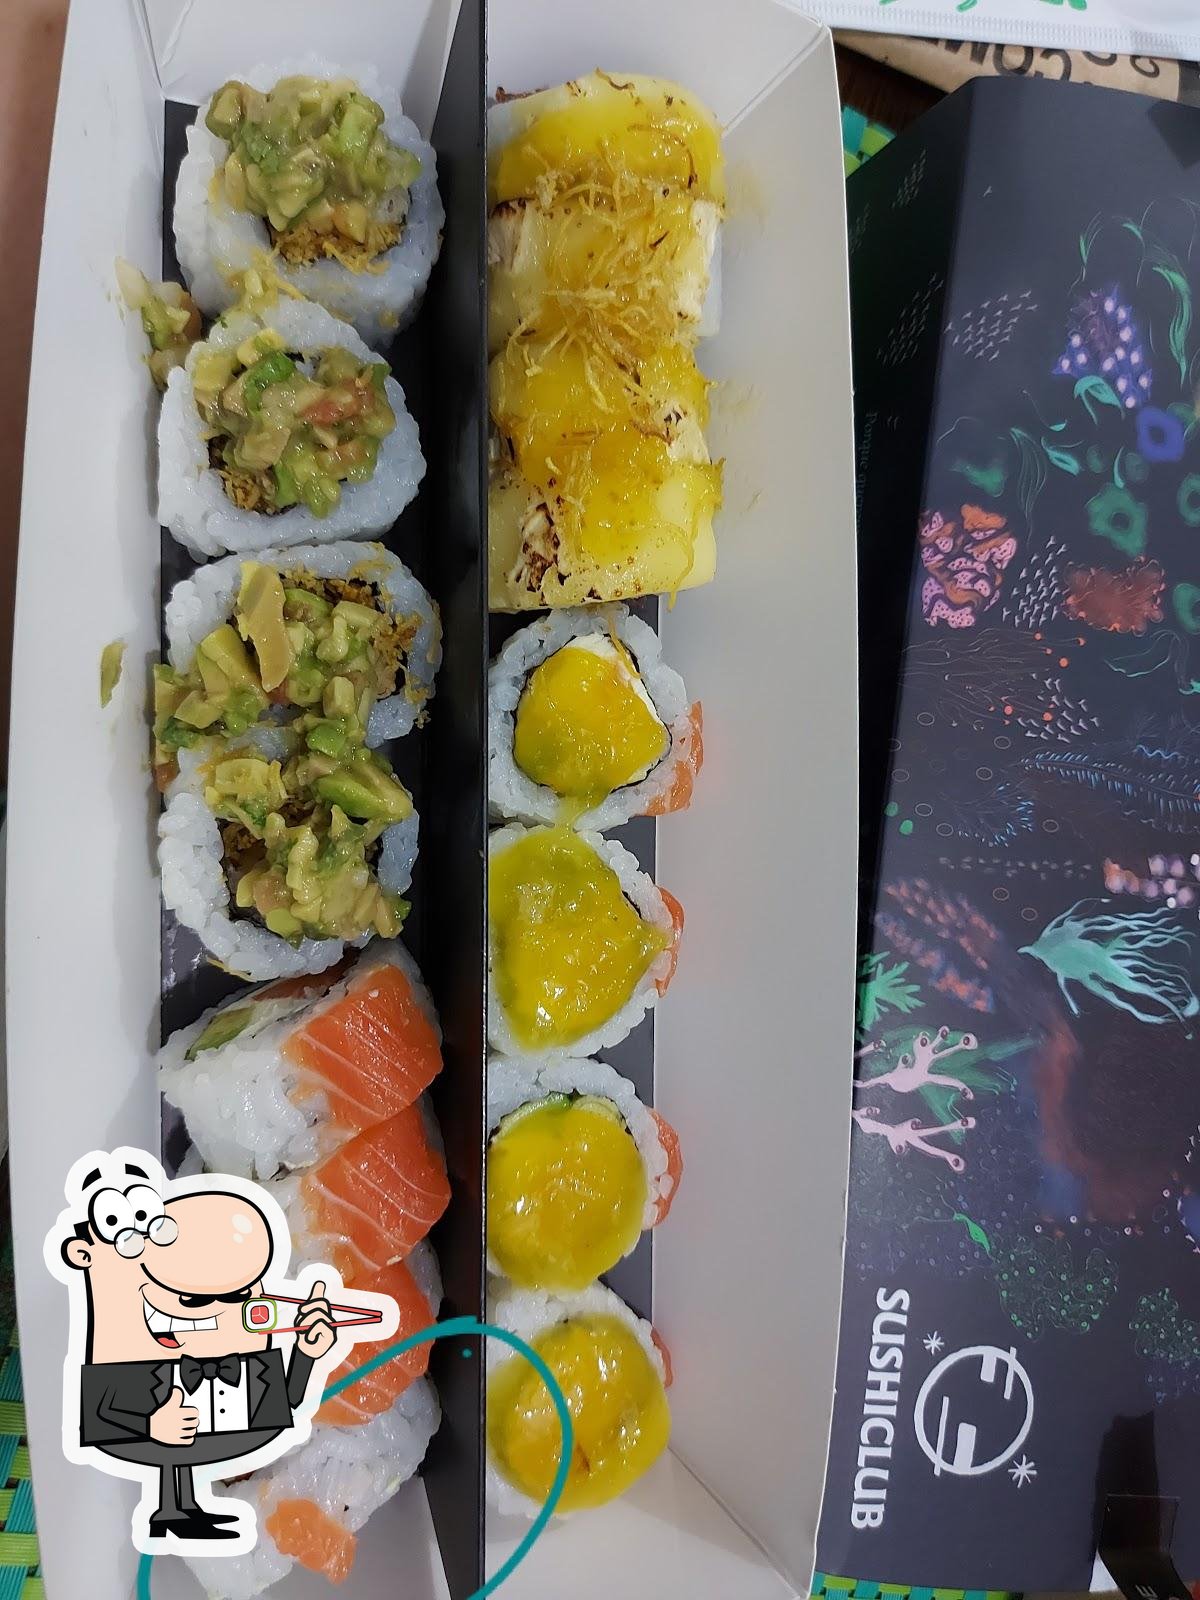 SushiClub Belgrano - Nuñez (Deli & Take), Buenos Aires, Migueletes 989 -  Restaurant menu and reviews